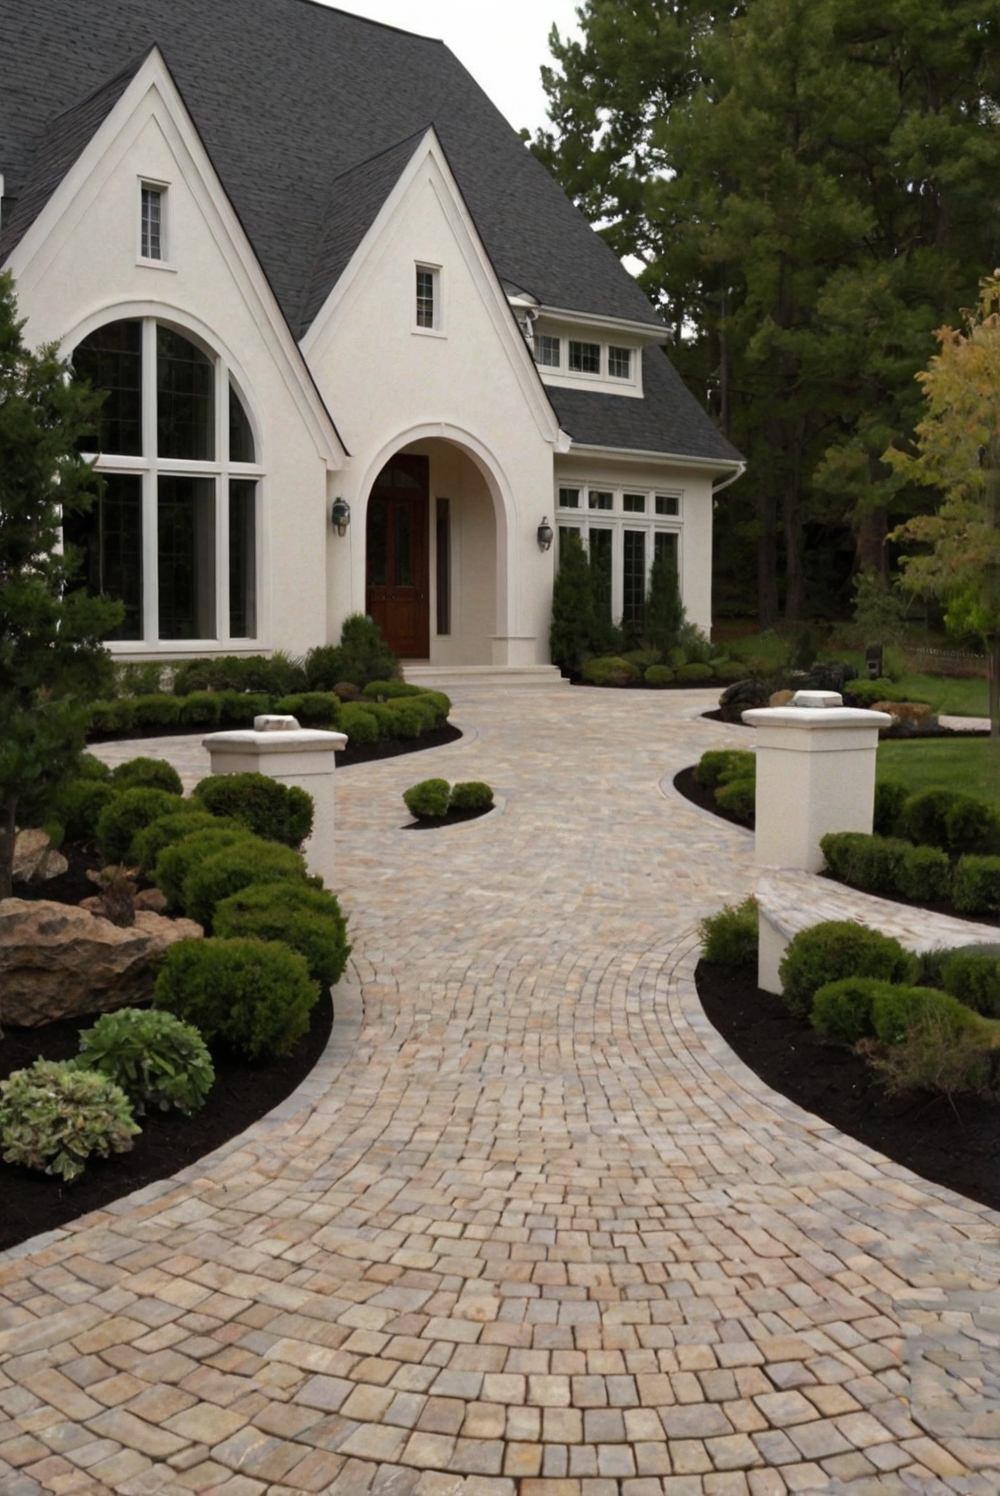 Designing Circle Driveways: Tips and Ideas (Maximize Curb Appeal with Circle Driveways)